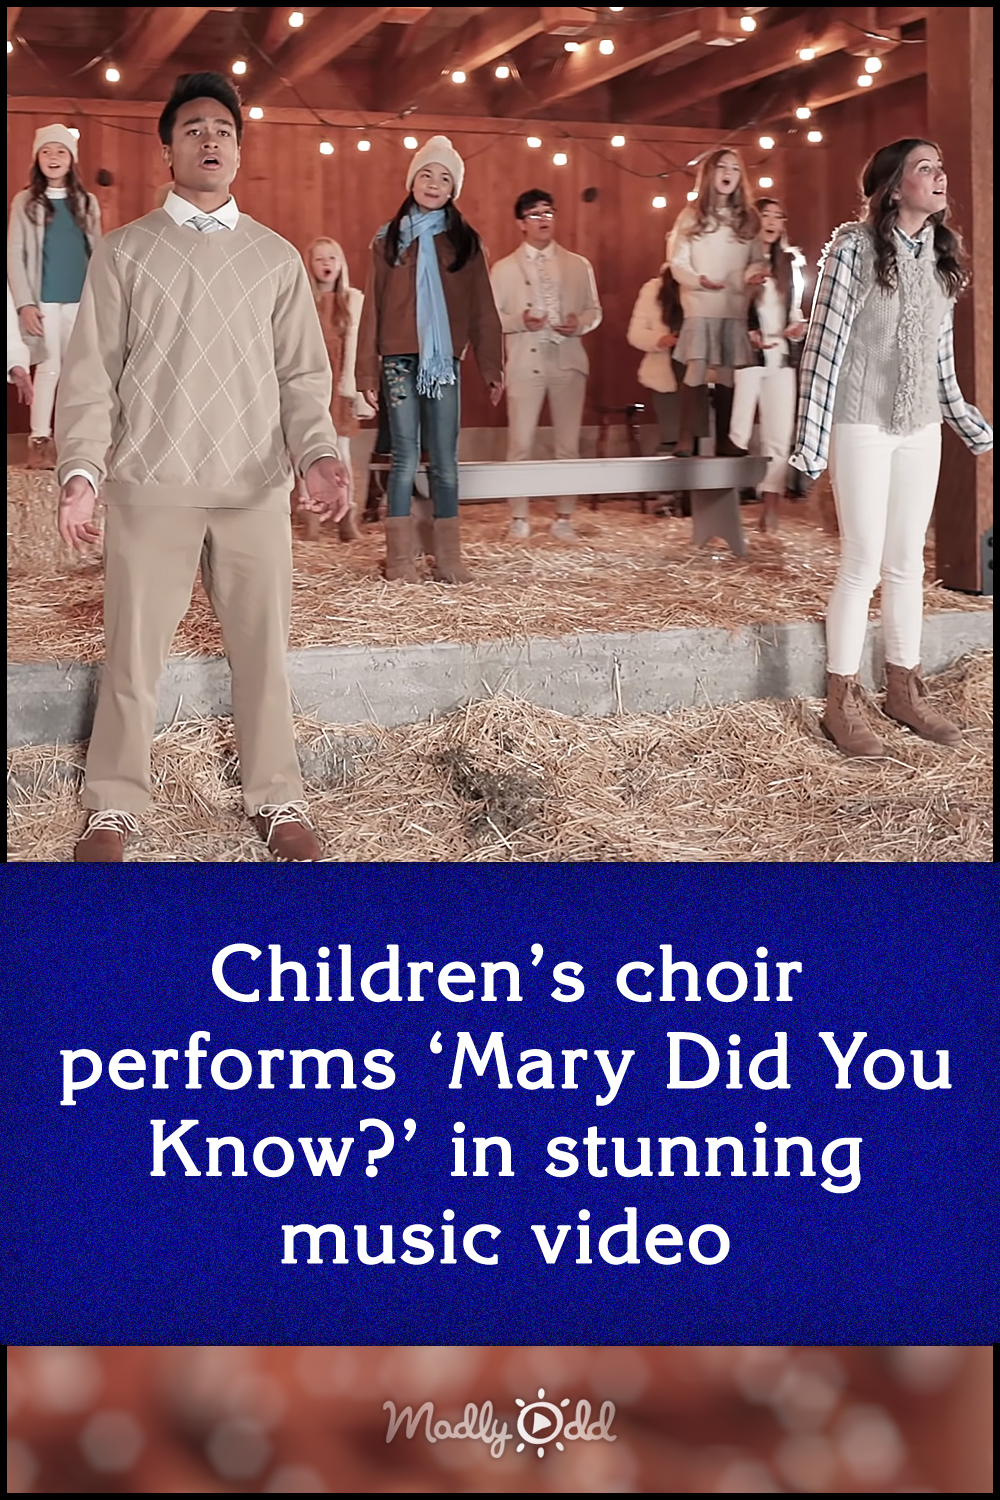 Children’s choir performs ‘Mary Did You Know?’ in stunning music video